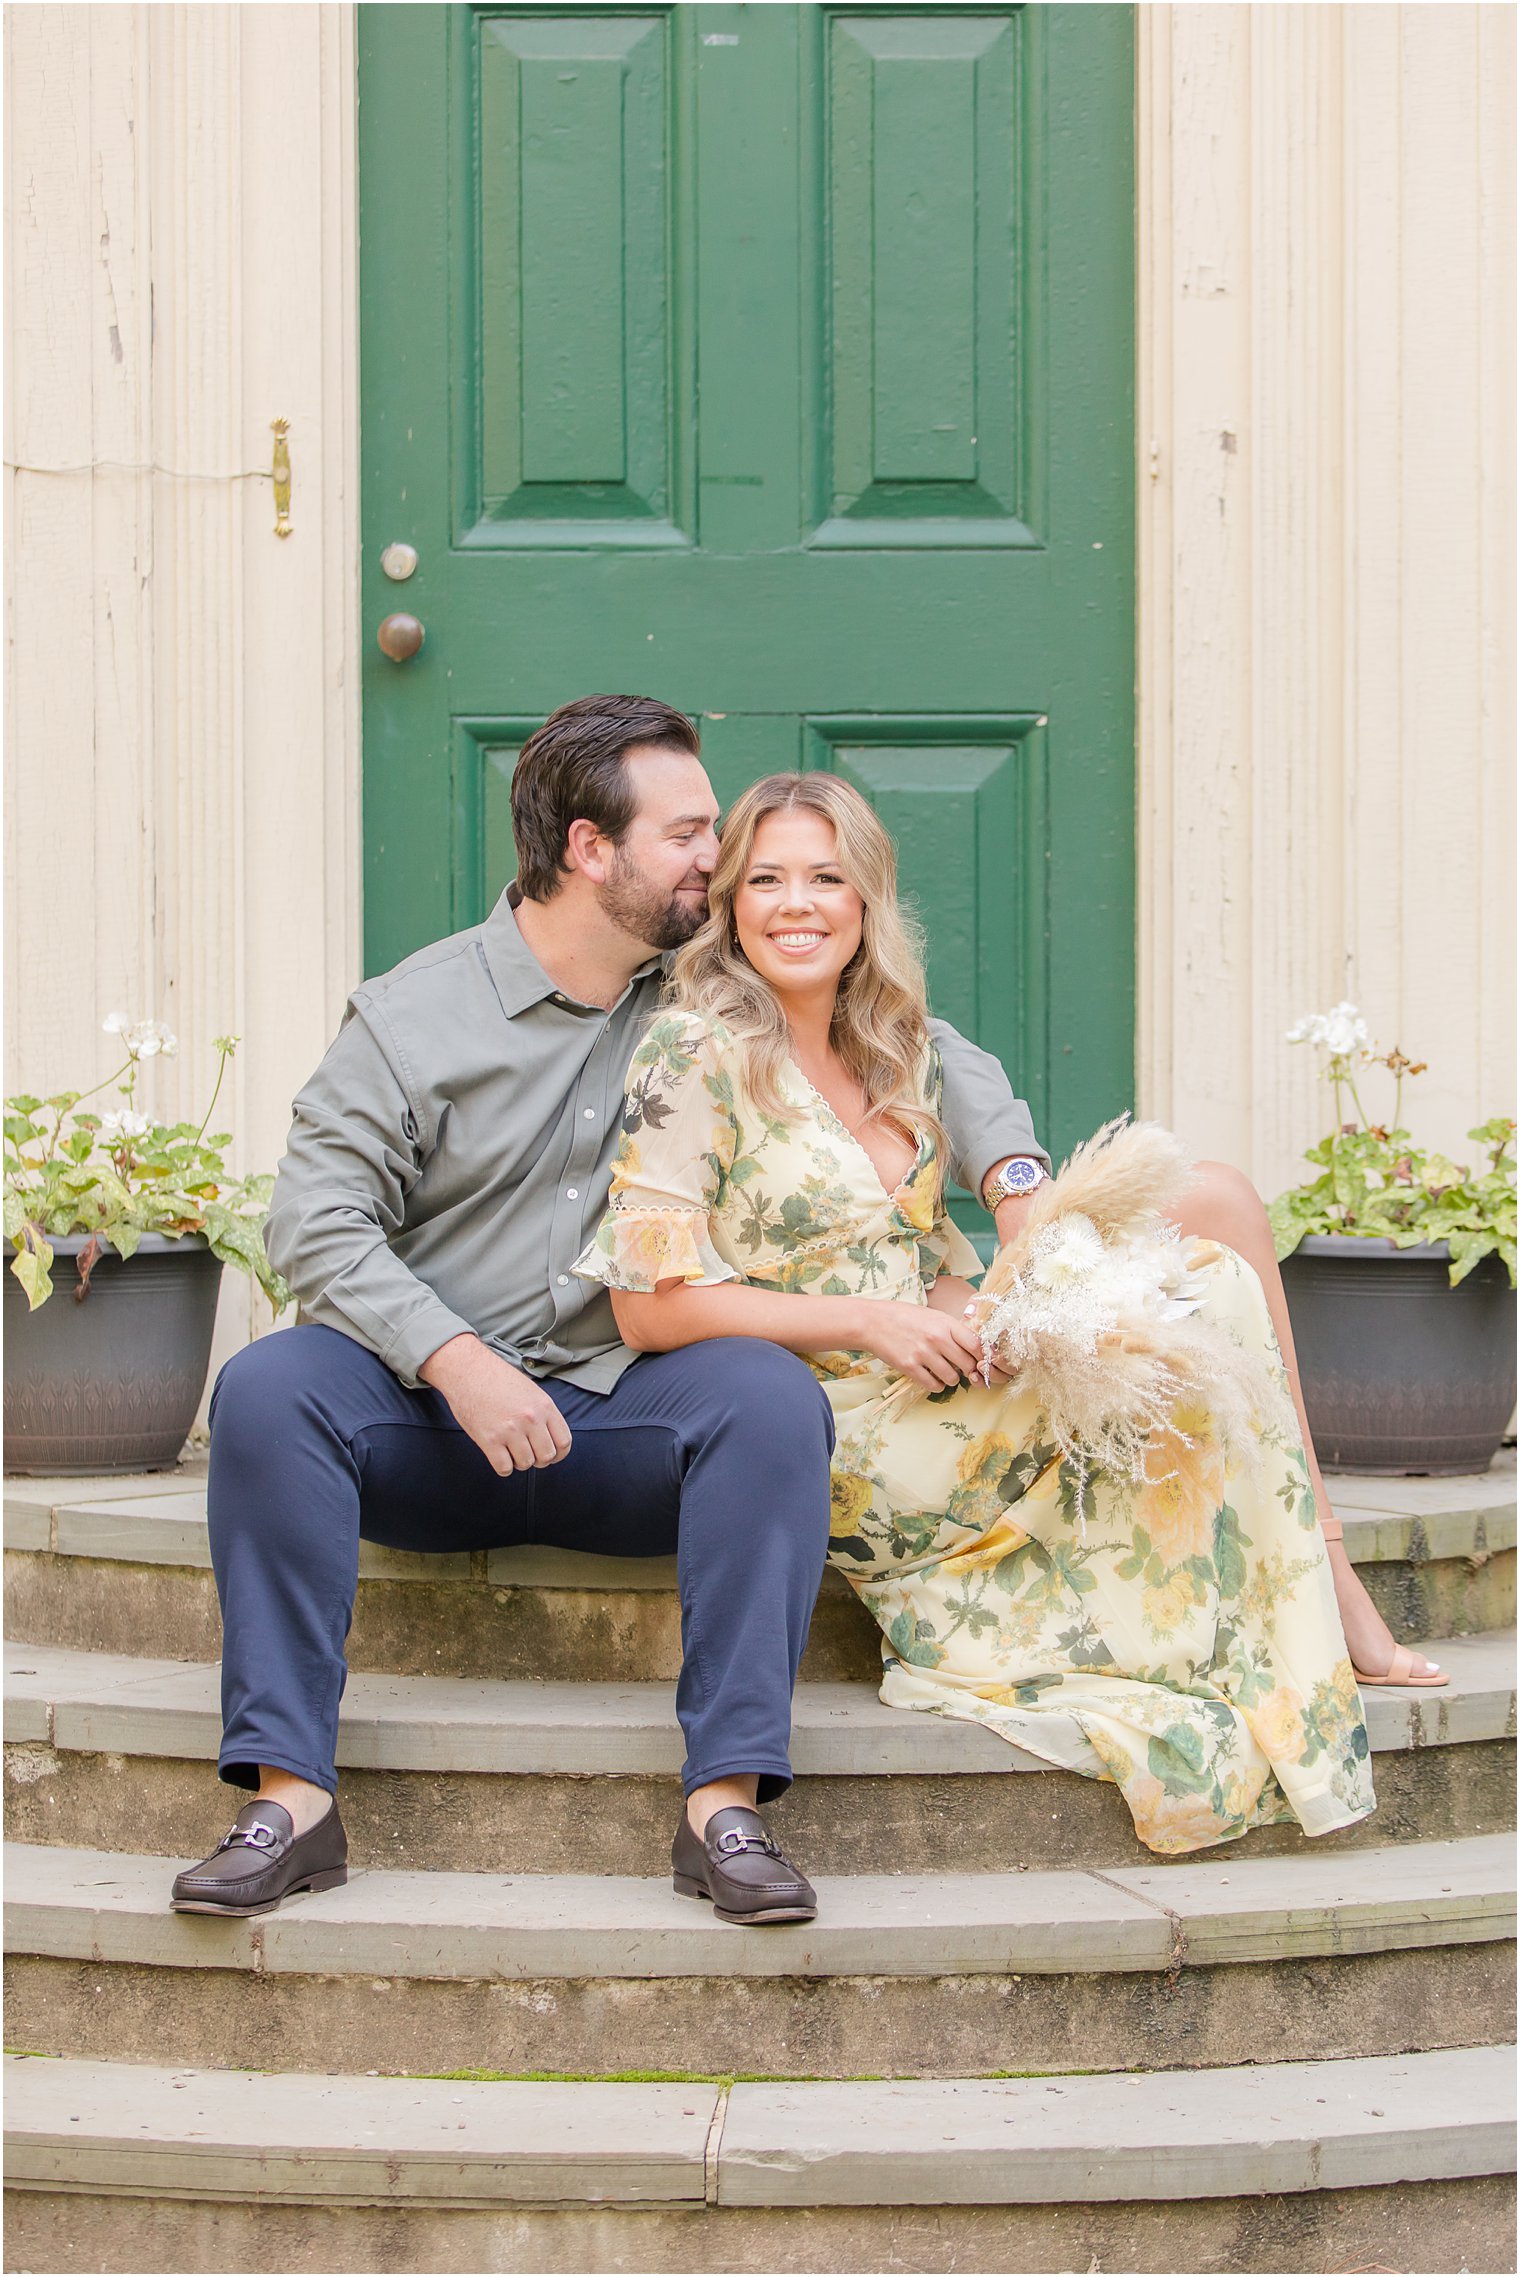 romantic summer engagement session in front of green door